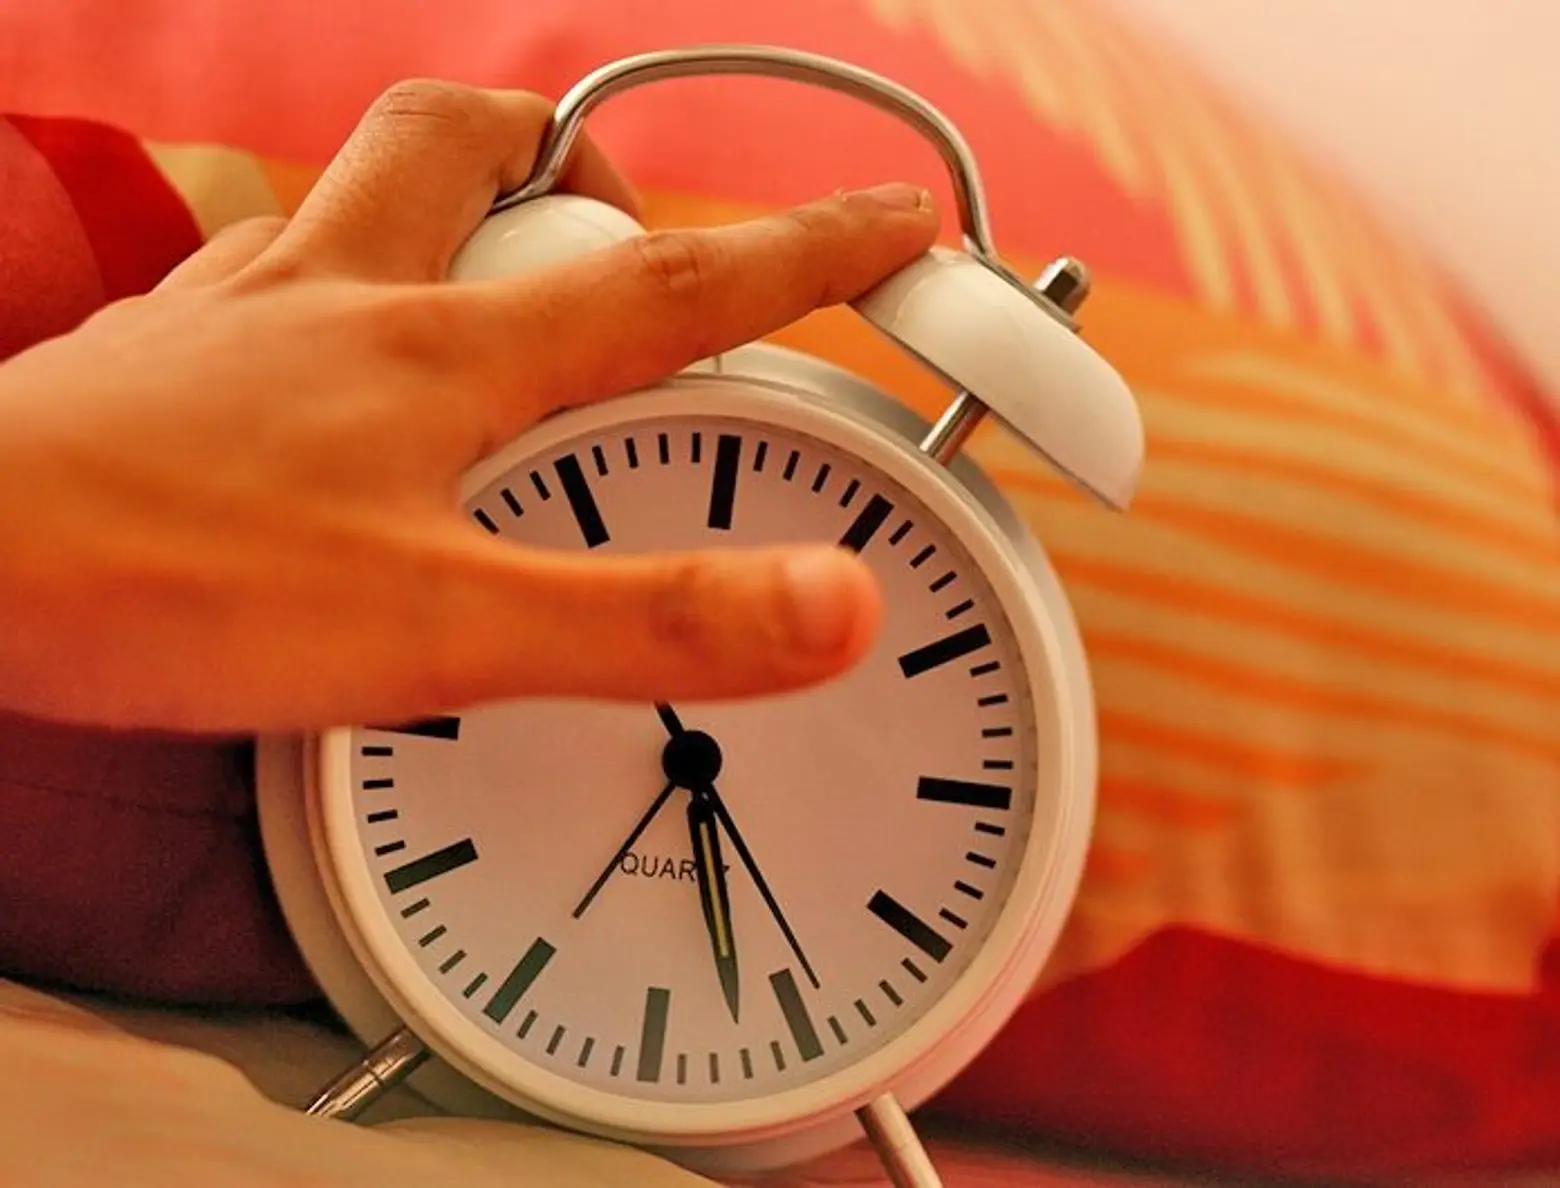 When does daylight saving time end in 2016?